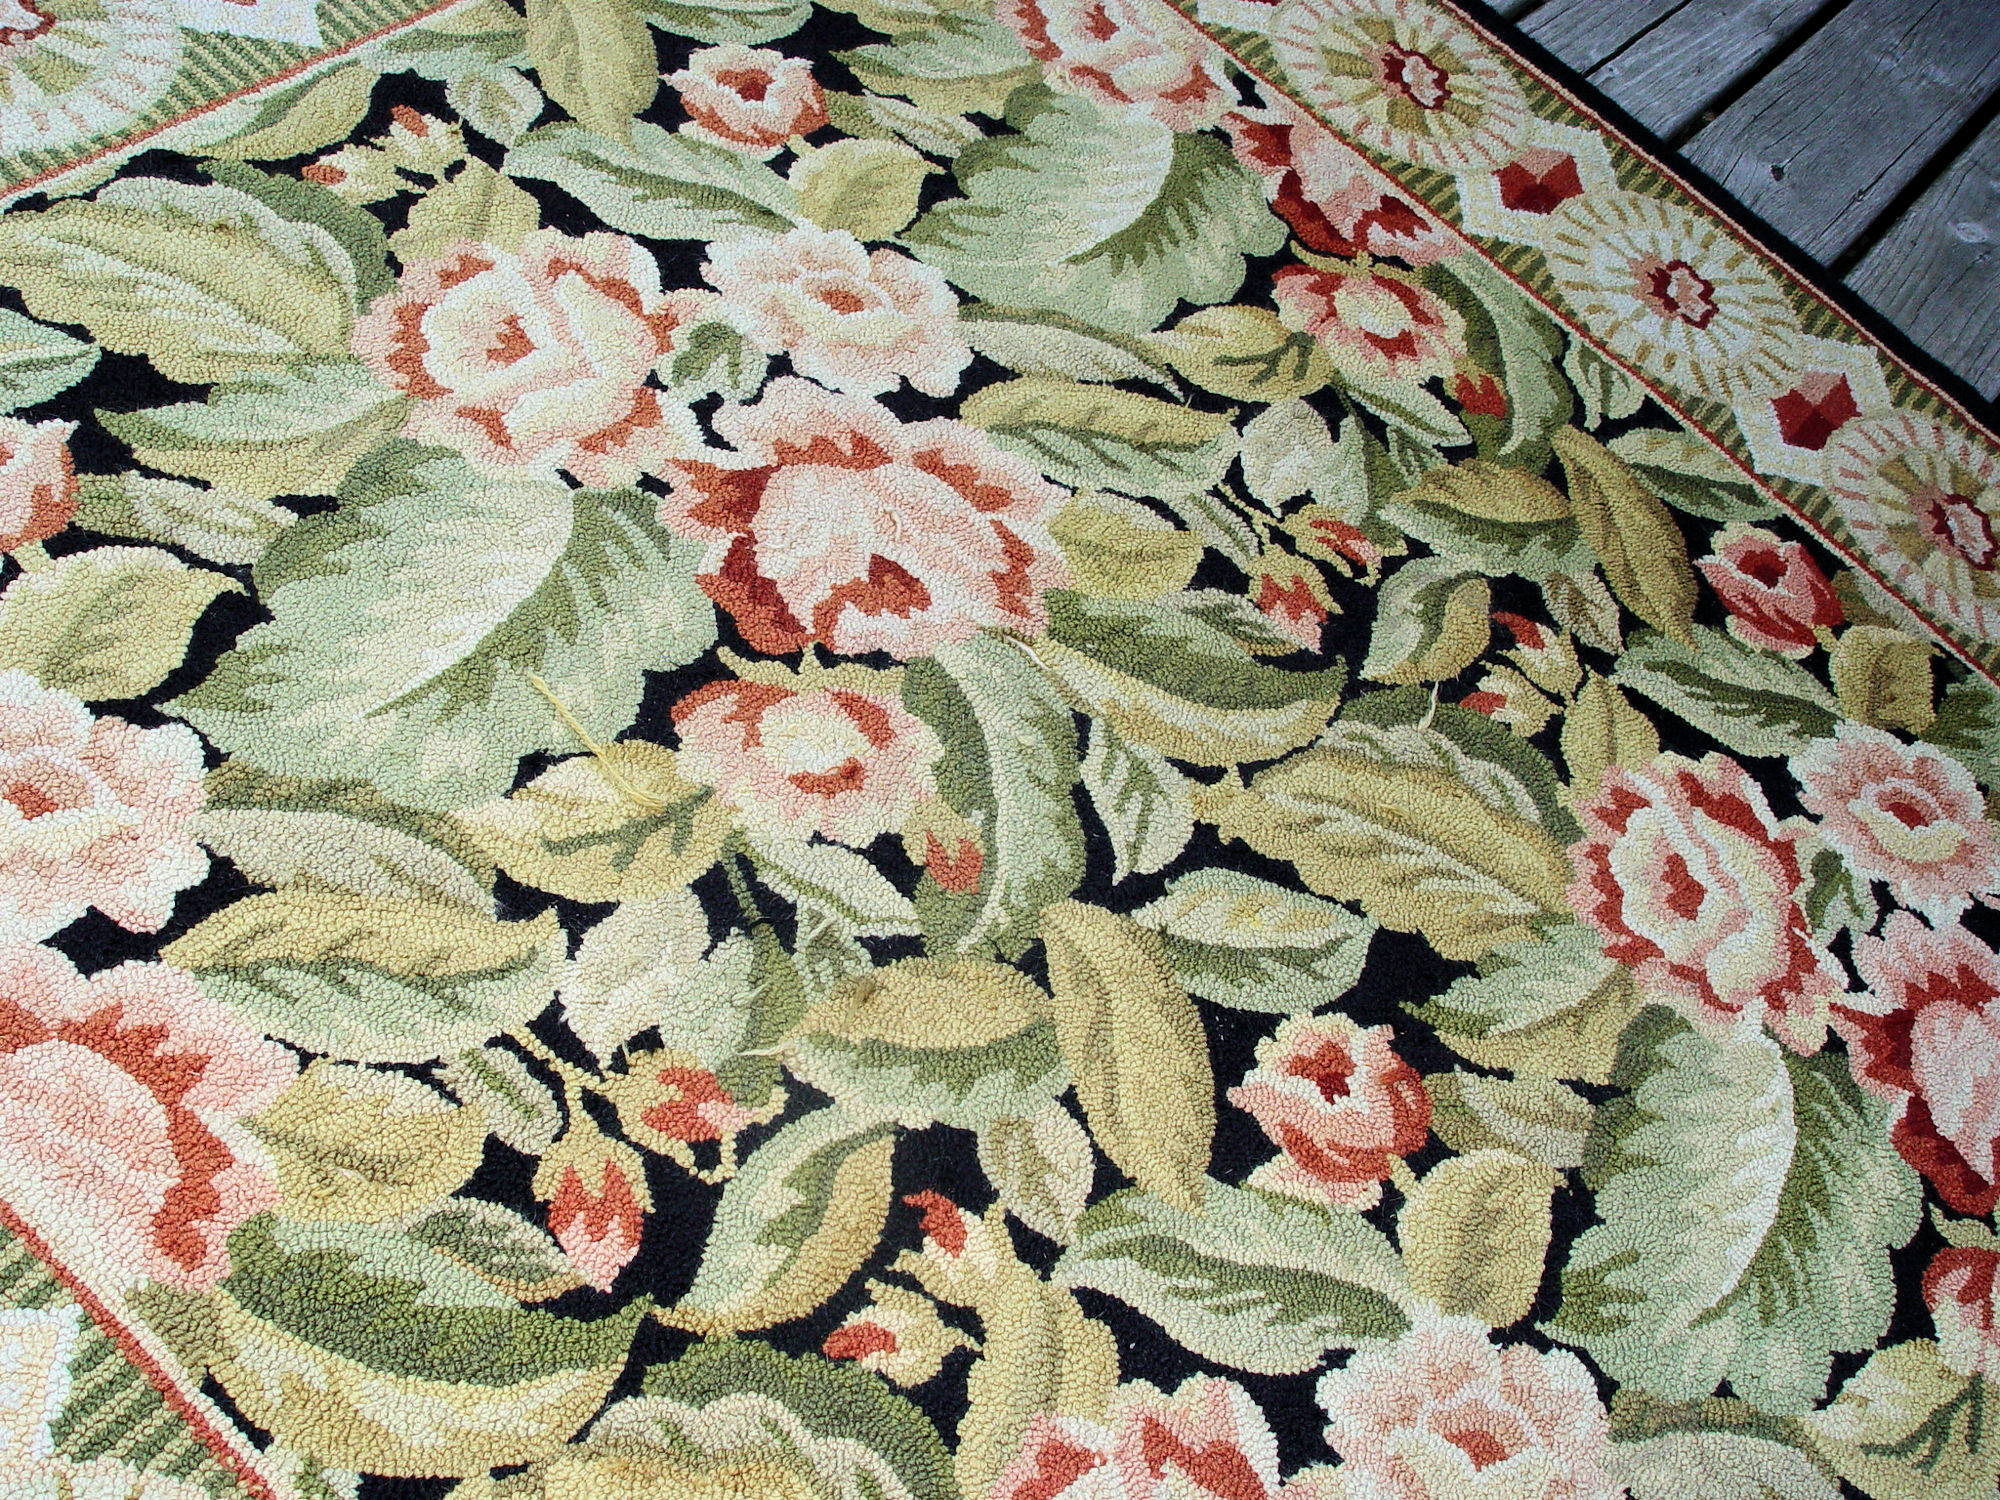 American Handmade Antique
                                        Hooked Rug with Fabulous Colors
                                        74X 45